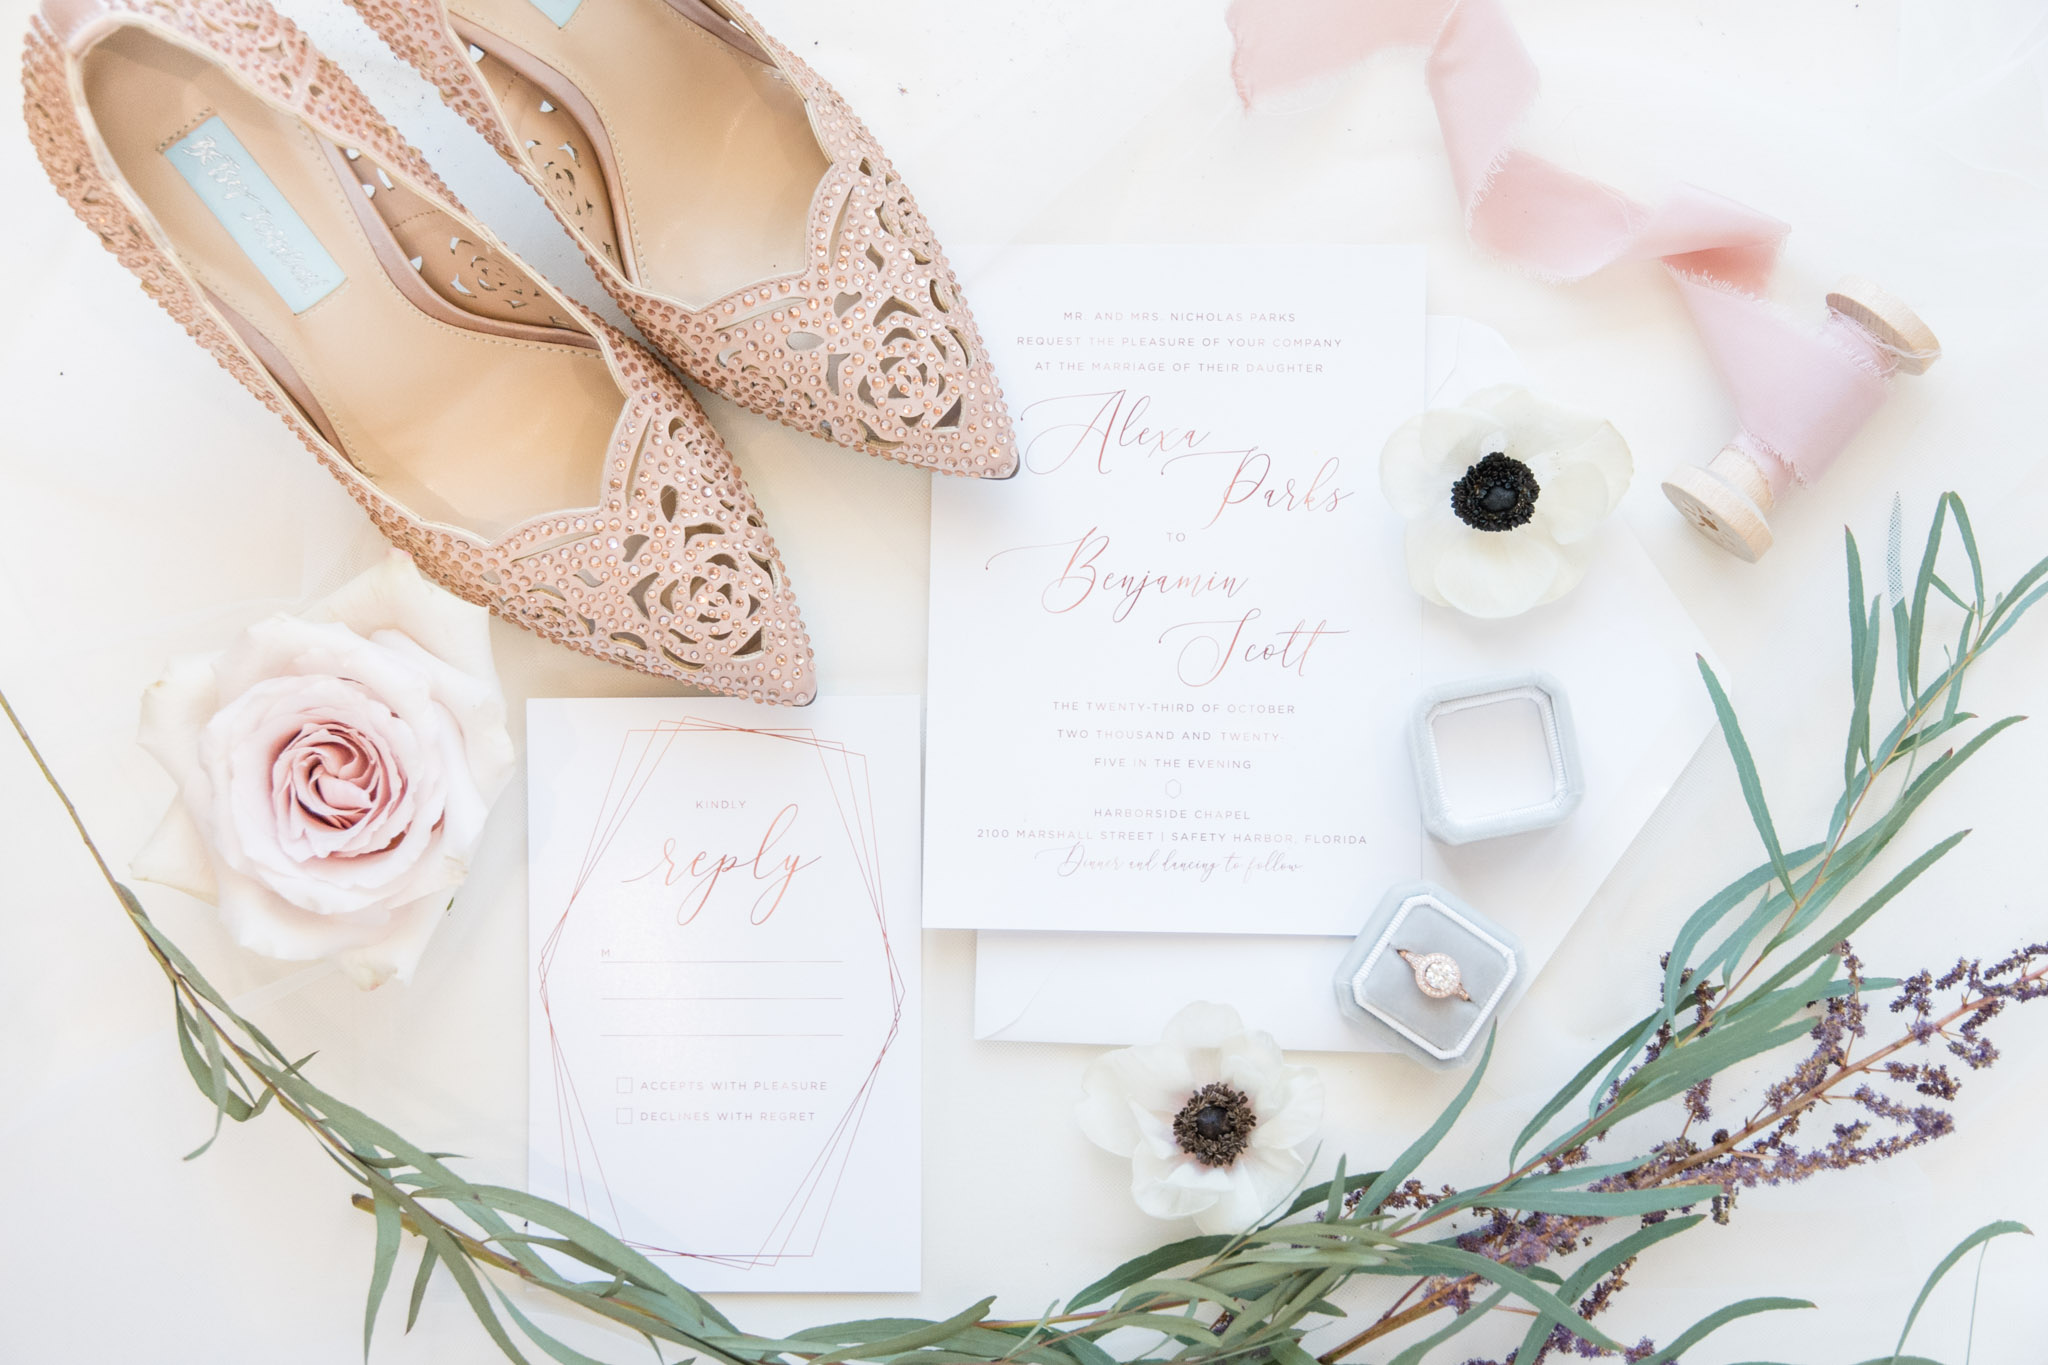 Wedding invitations with shoes and flowers.